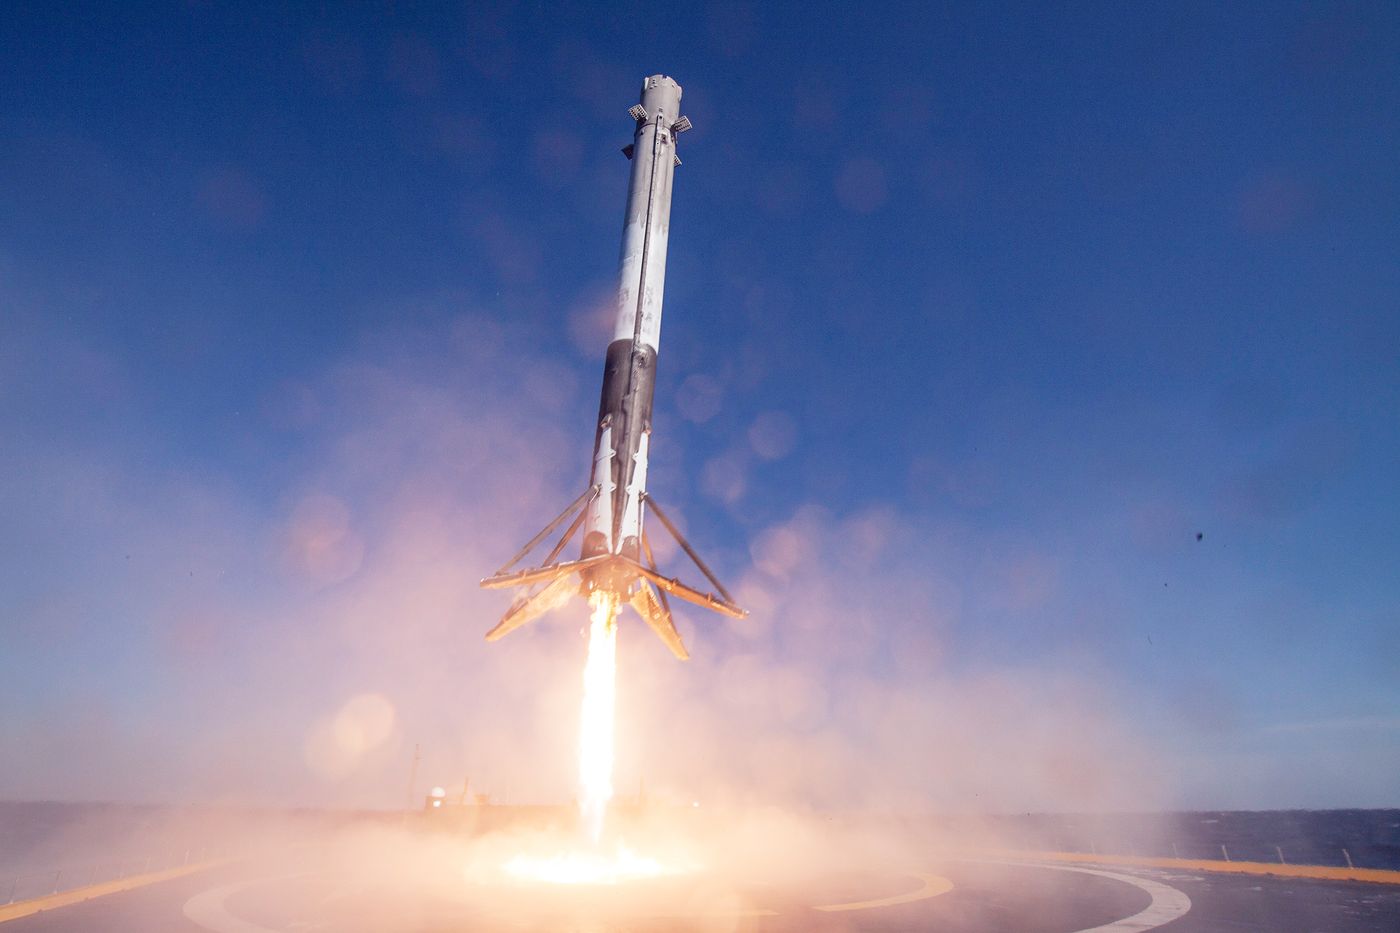 SpaceX's Falcon 9 rocket is seeing launch delays as recent explosion investigations are ongoing.